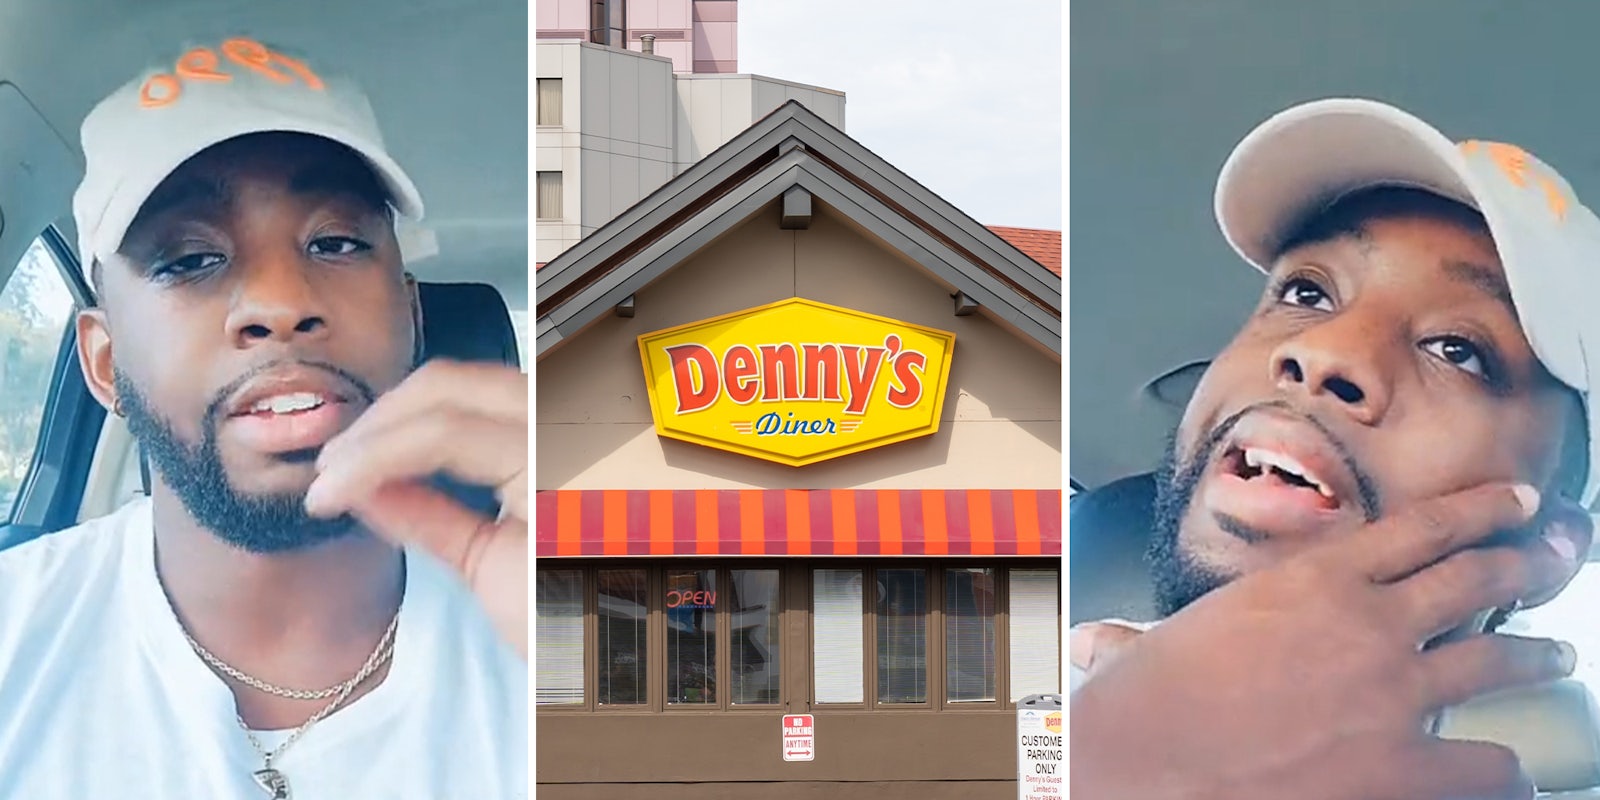 Black man meets 89-year-old at Denny’s. He makes a horrifying confession